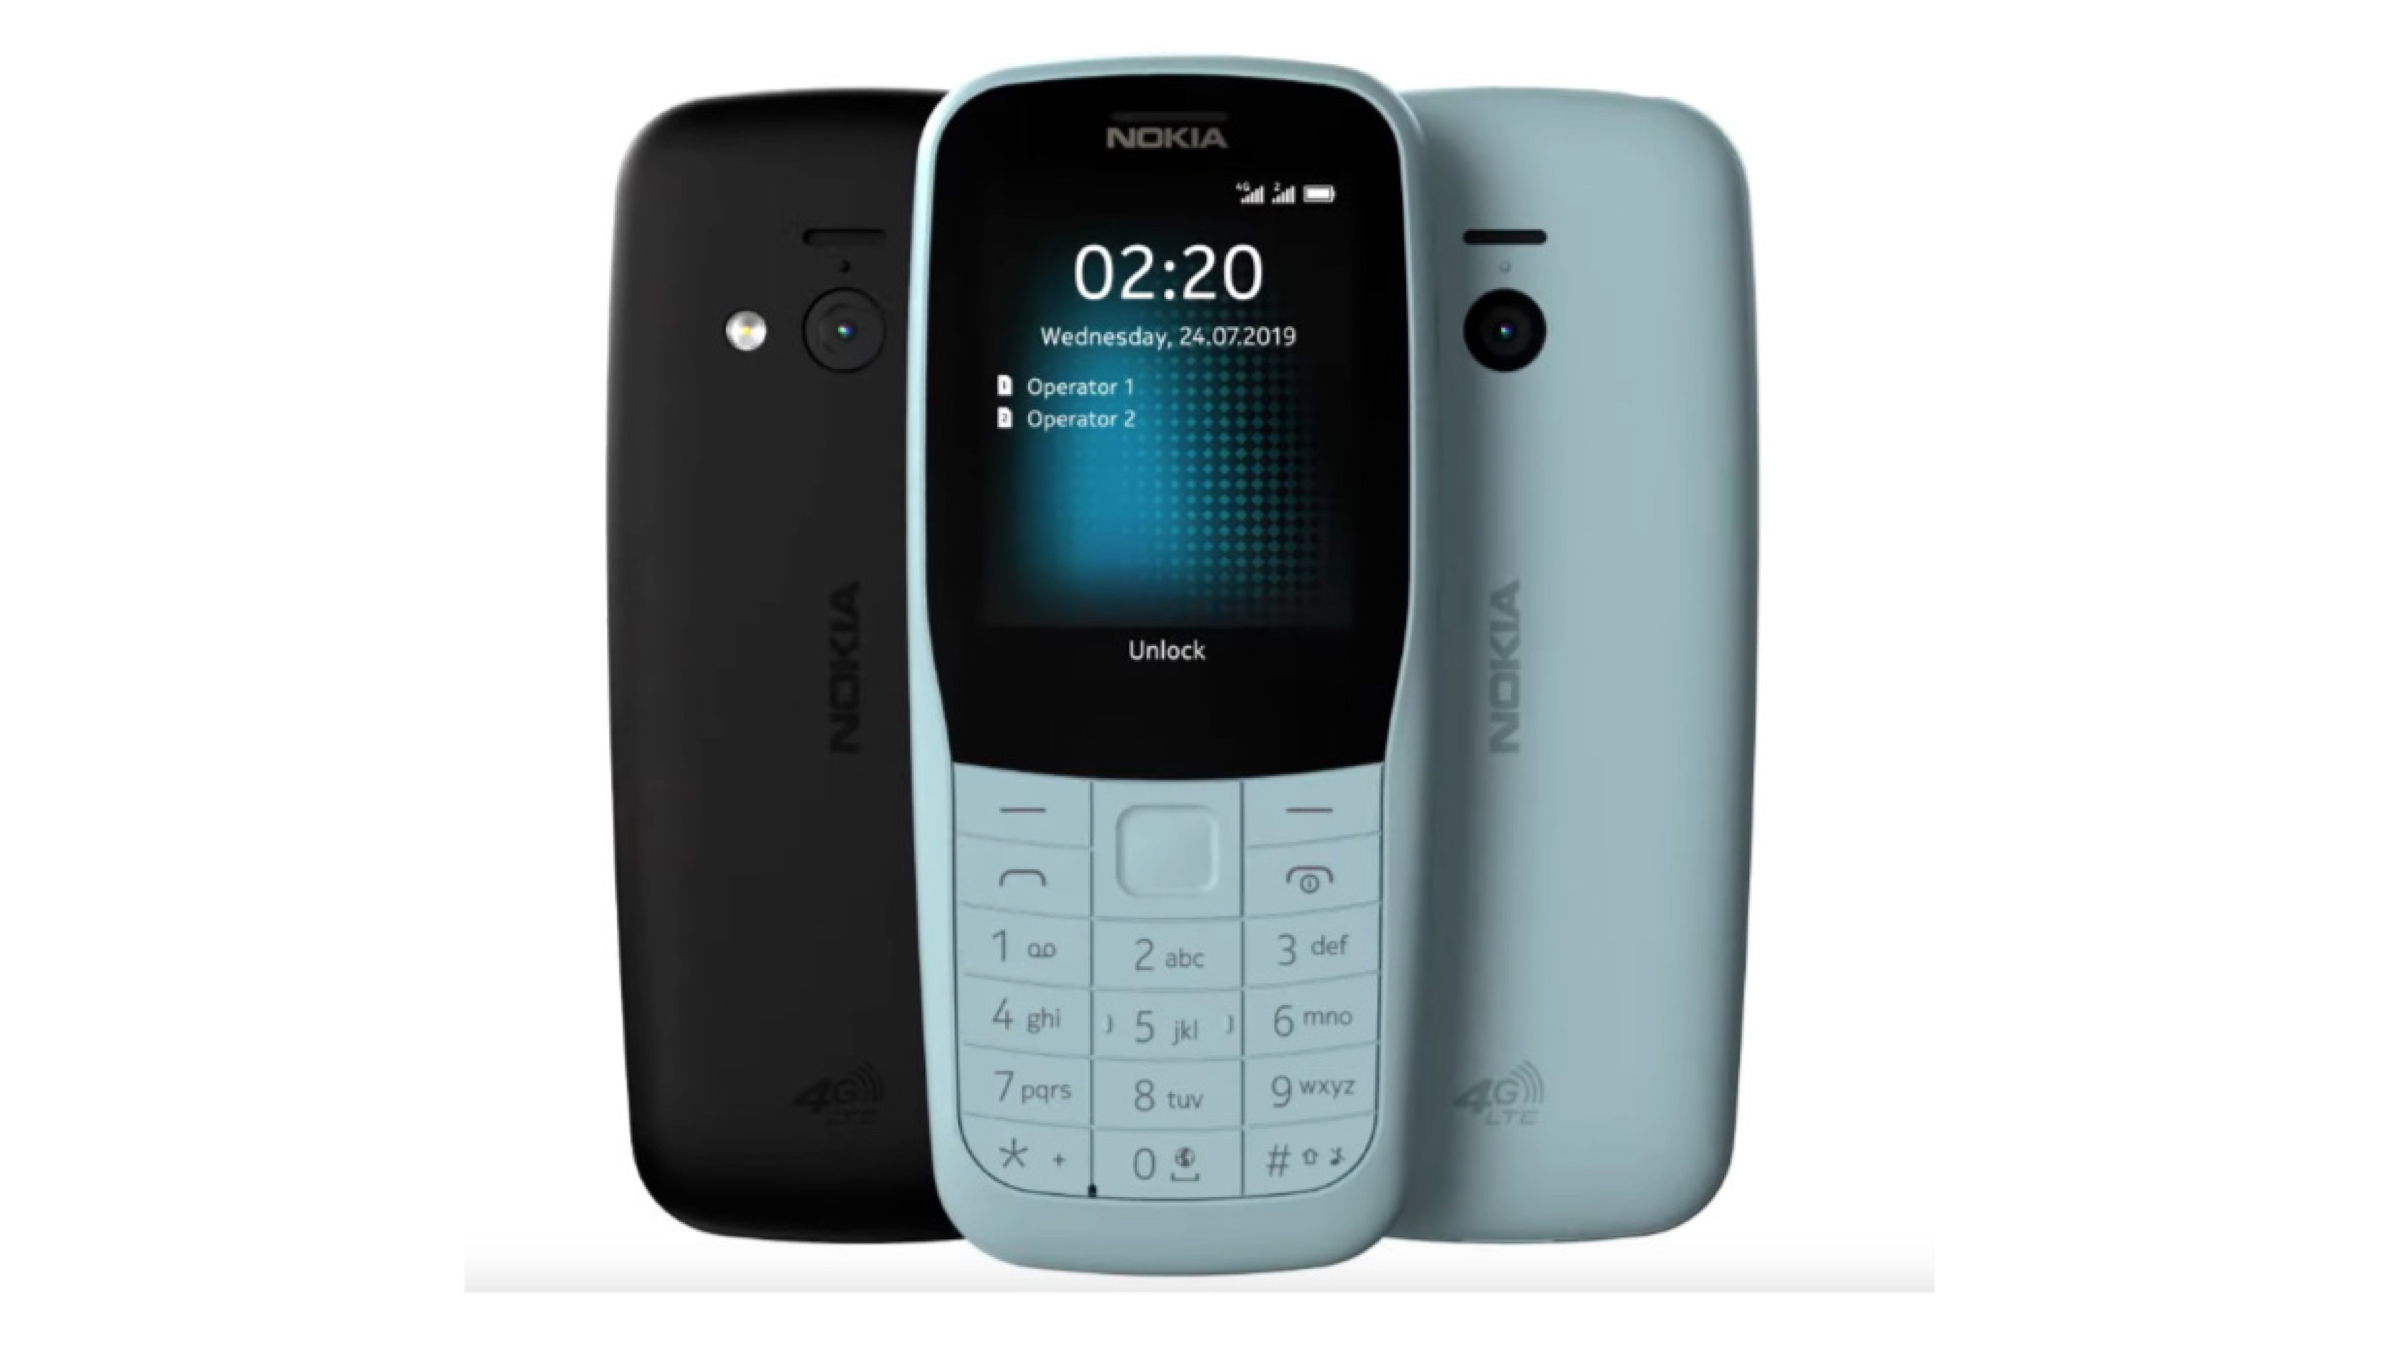 Nokia 220 4G & Nokia 105 Launched, Features, Price | iGyaan Network